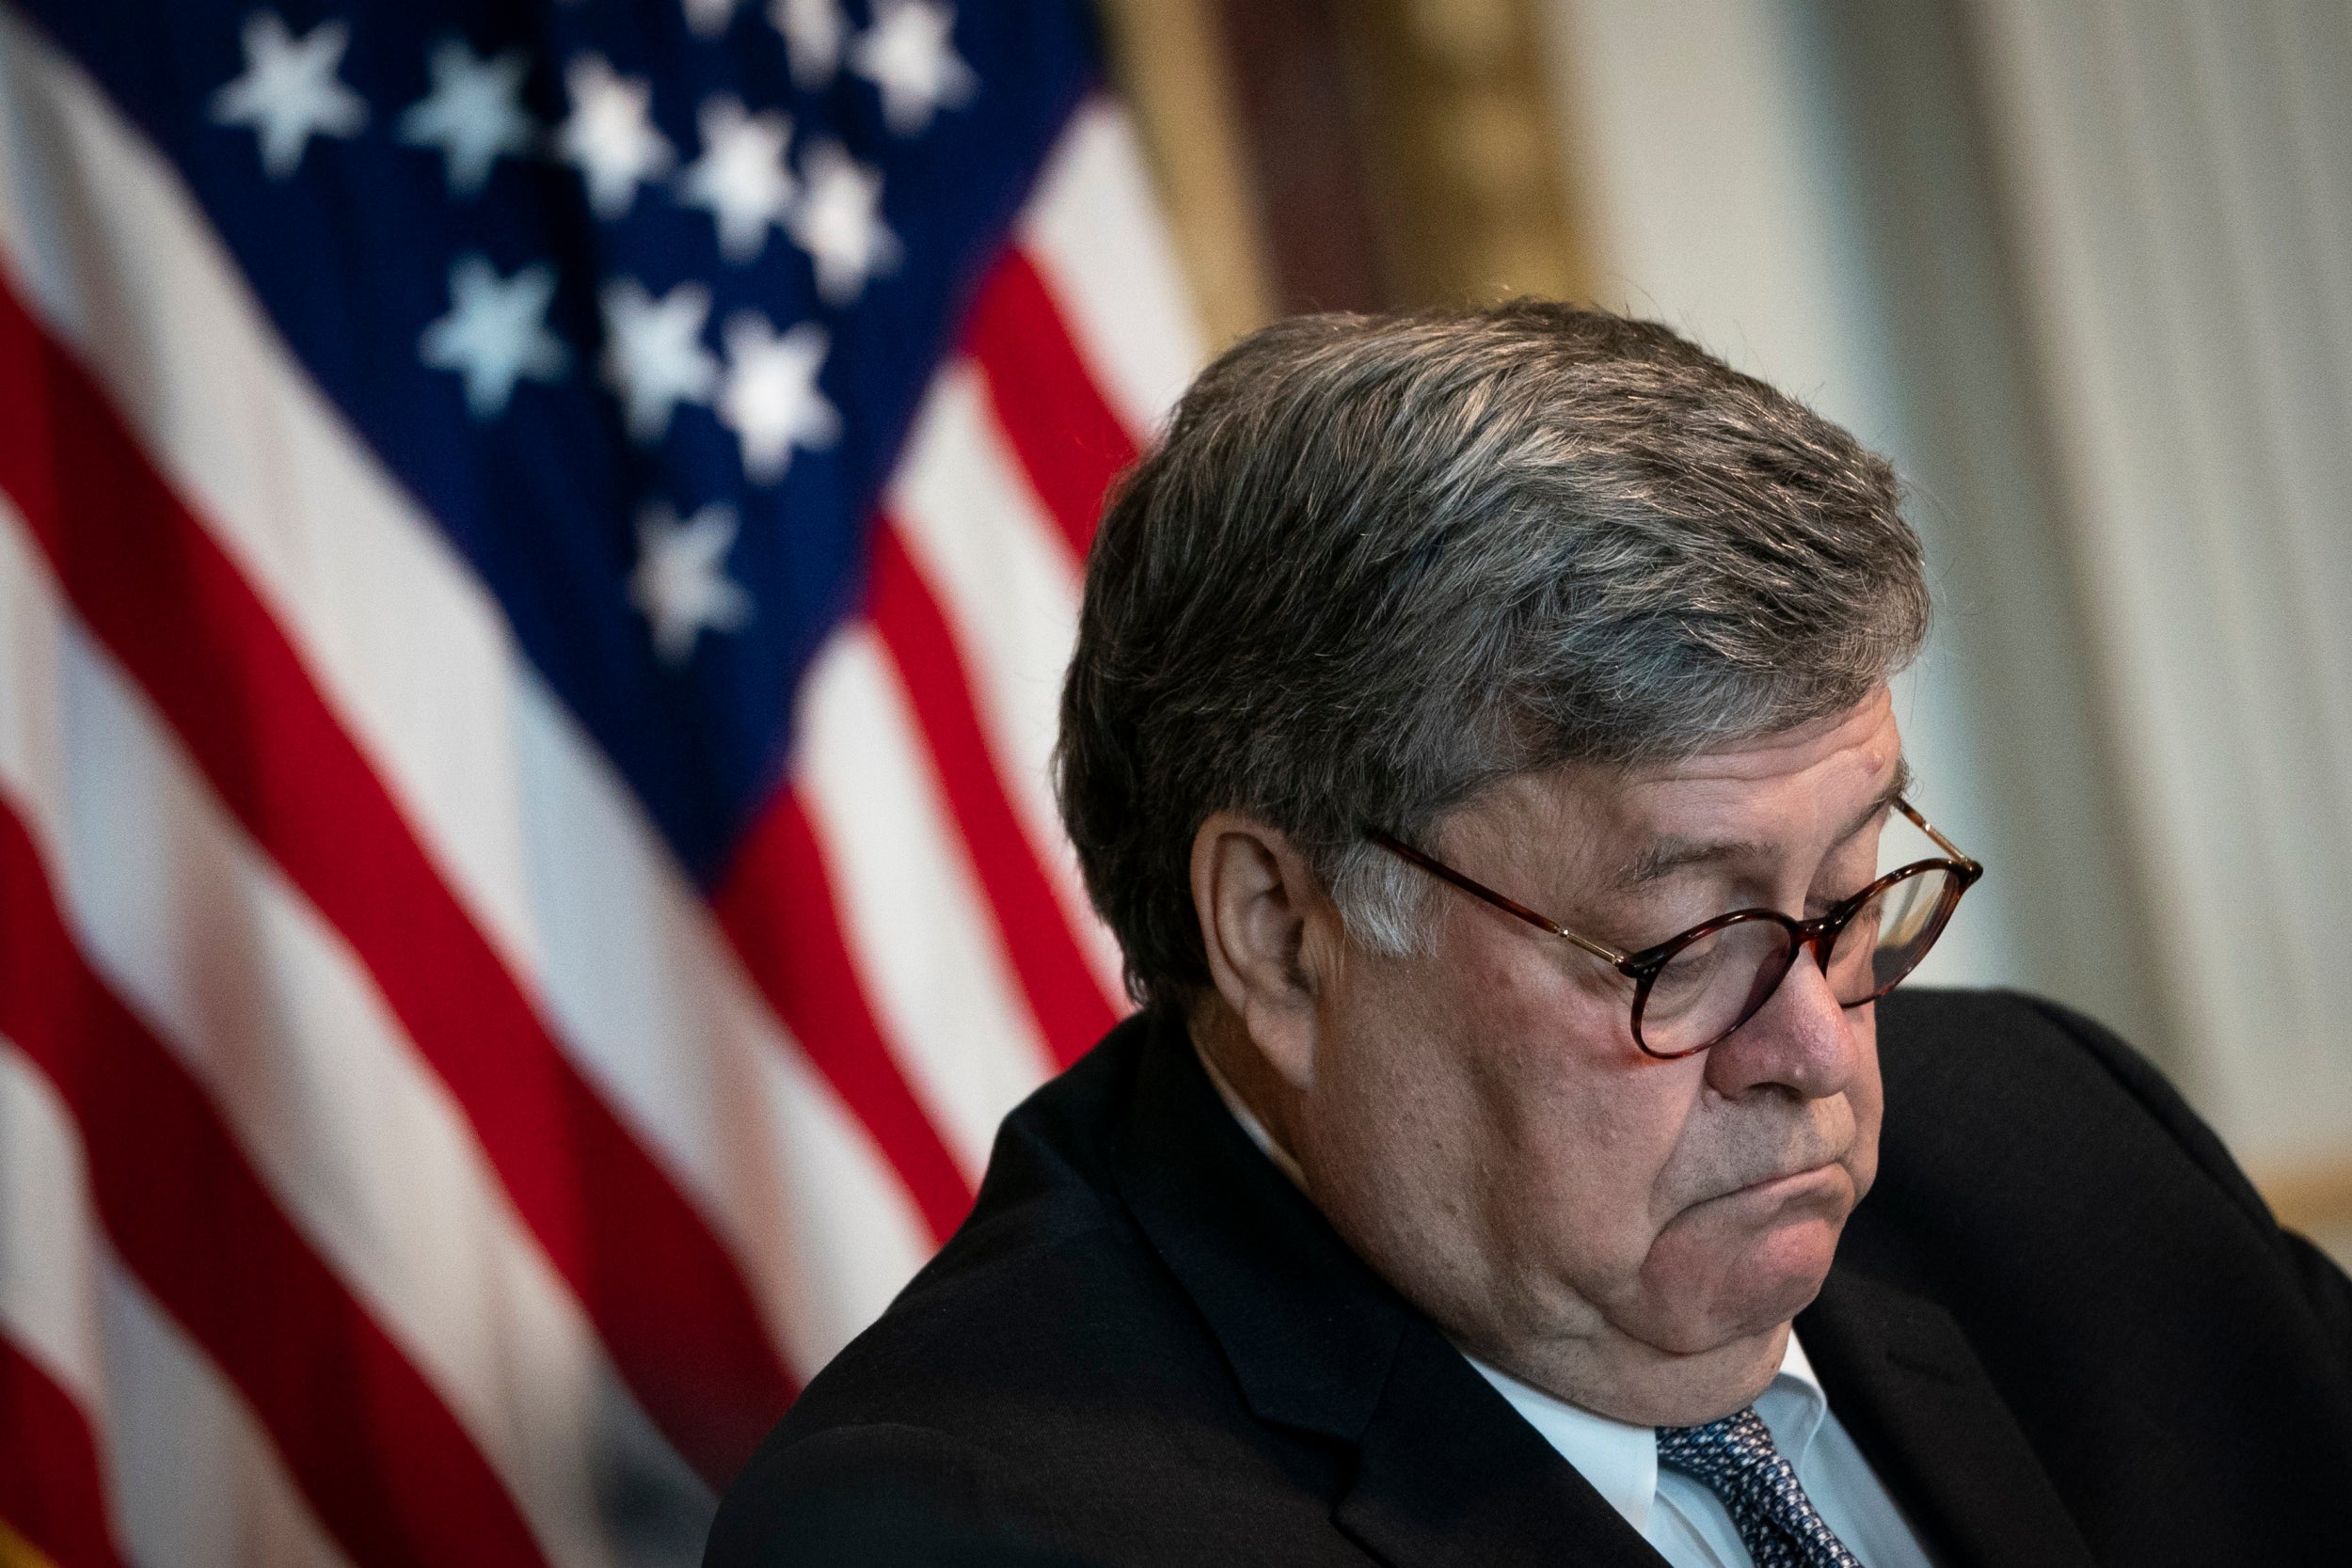 Groups say Barr used the powers of the DOJ as a vehicle for supporting the political objectives of President Donald Trump